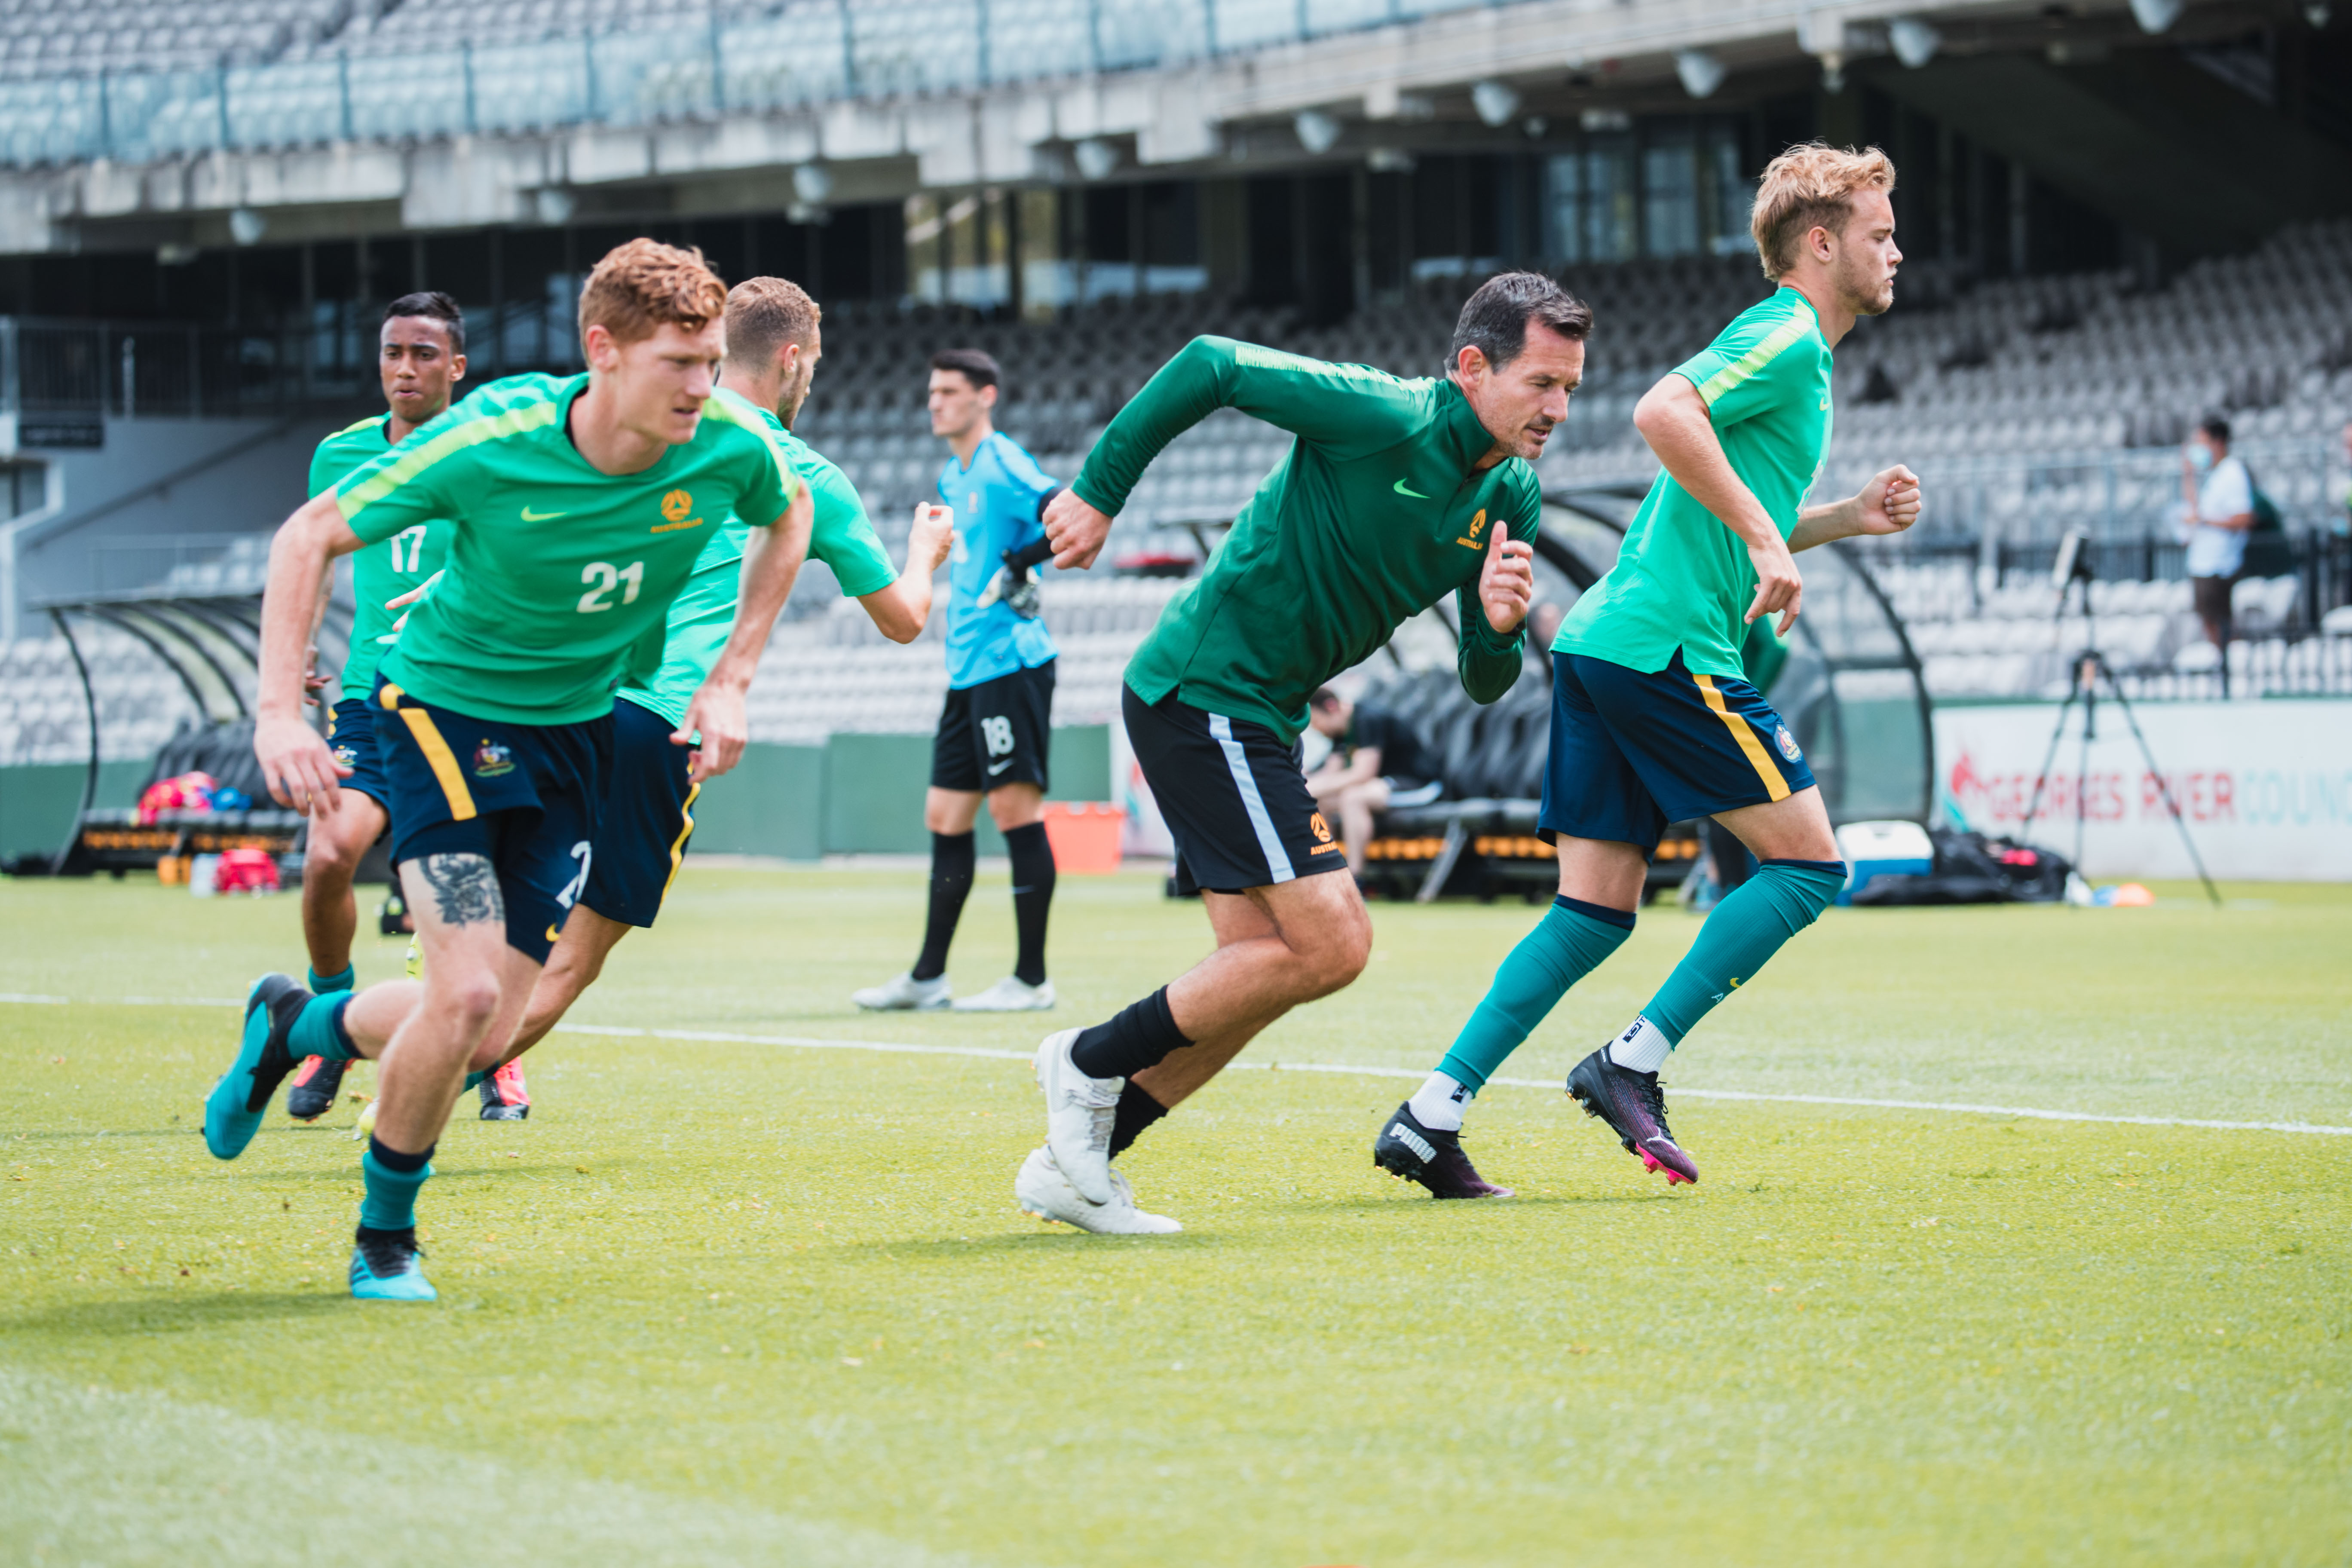 Olyroos in warm up